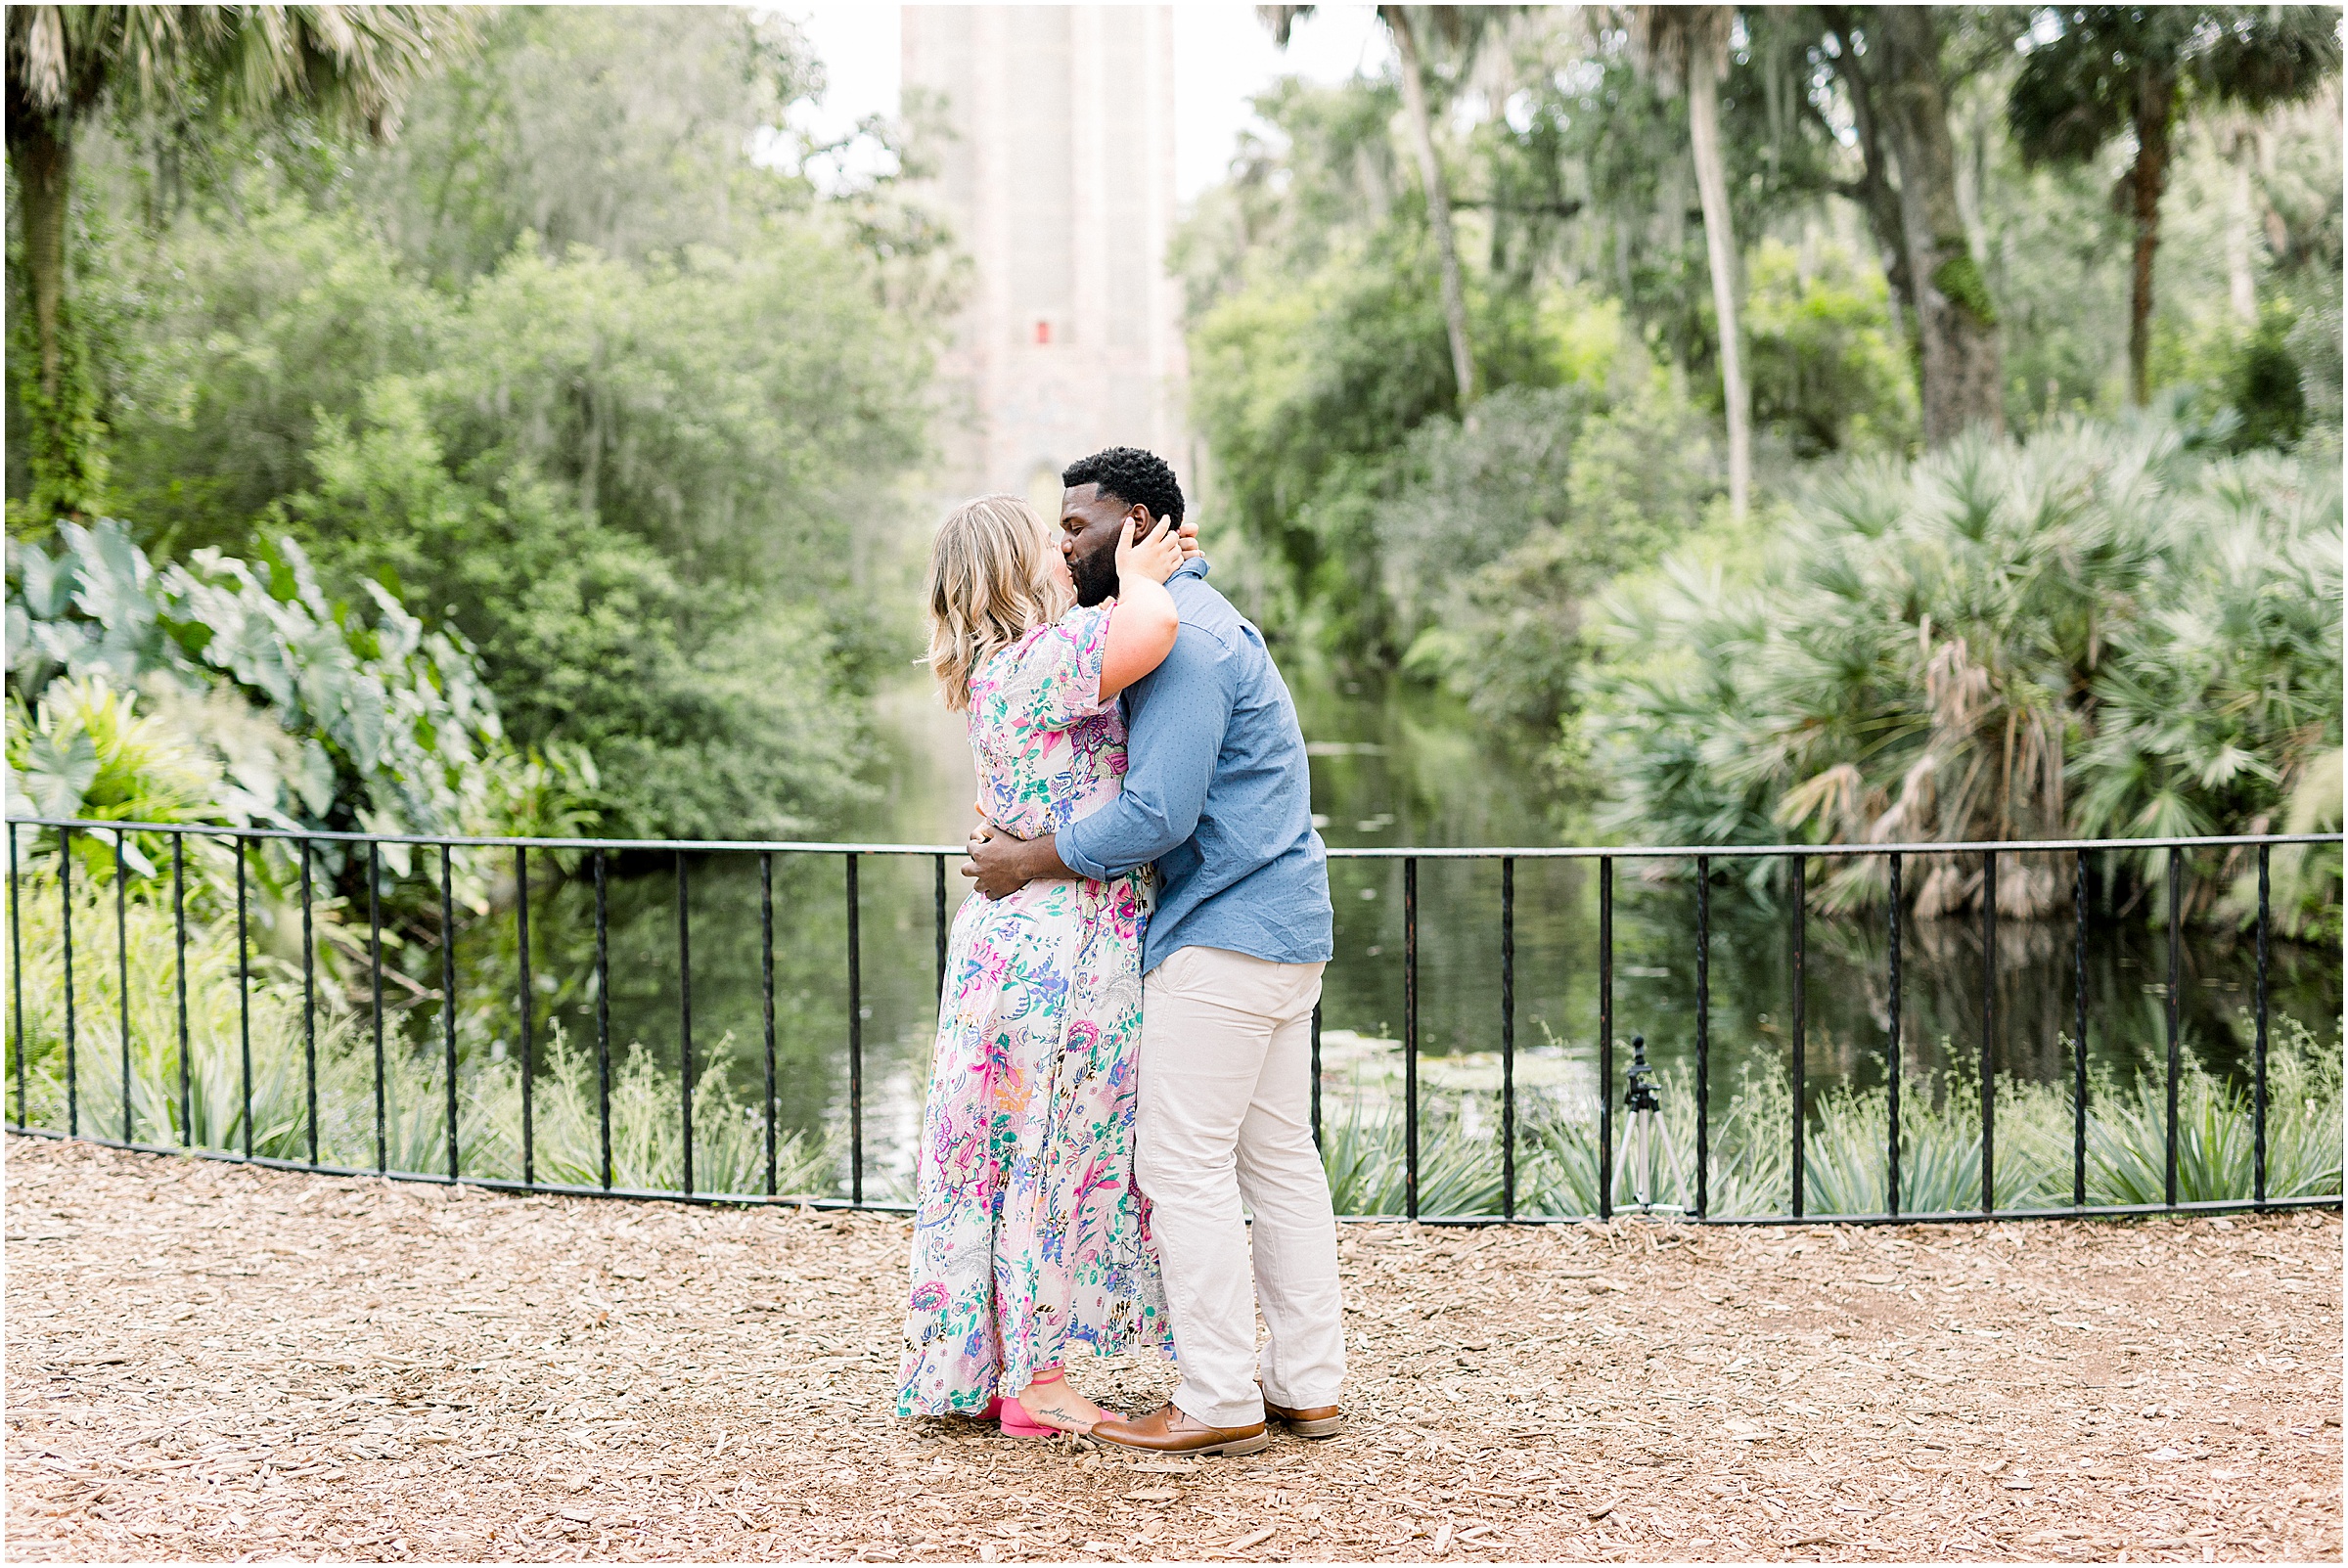 On April 13, 2019, I said yes to my boyfriend Adson at Bok Tower Gardens in Lake Wales, Florida.